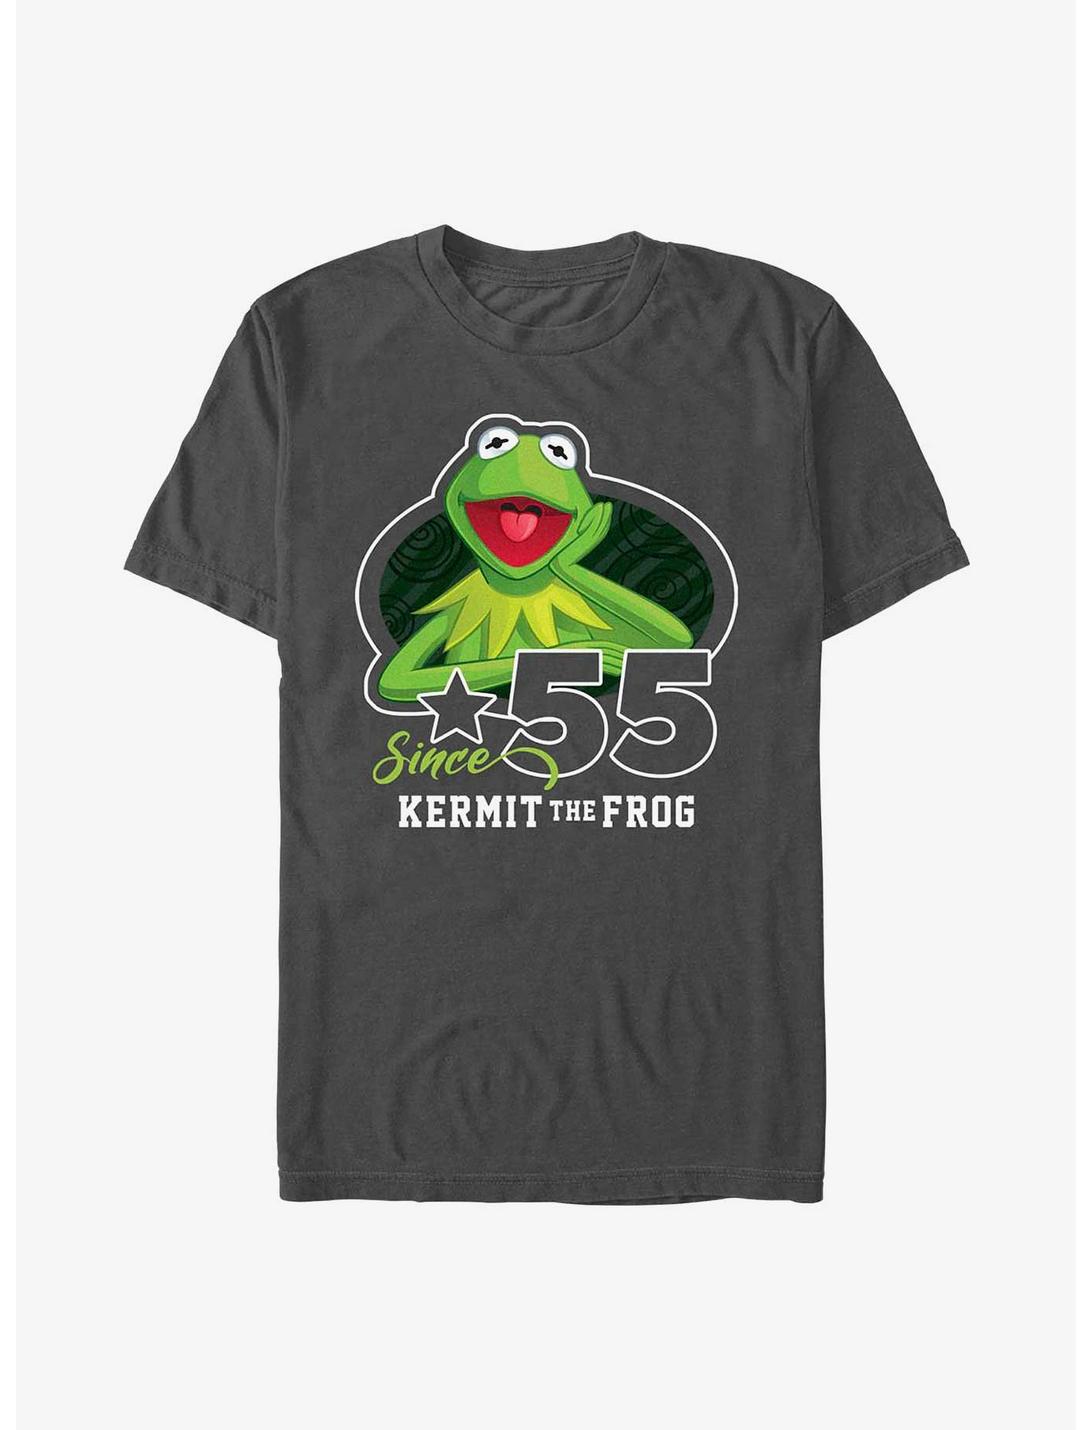 Disney The Muppets Kermit The Frog Since '55 T-Shirt, CHARCOAL, hi-res